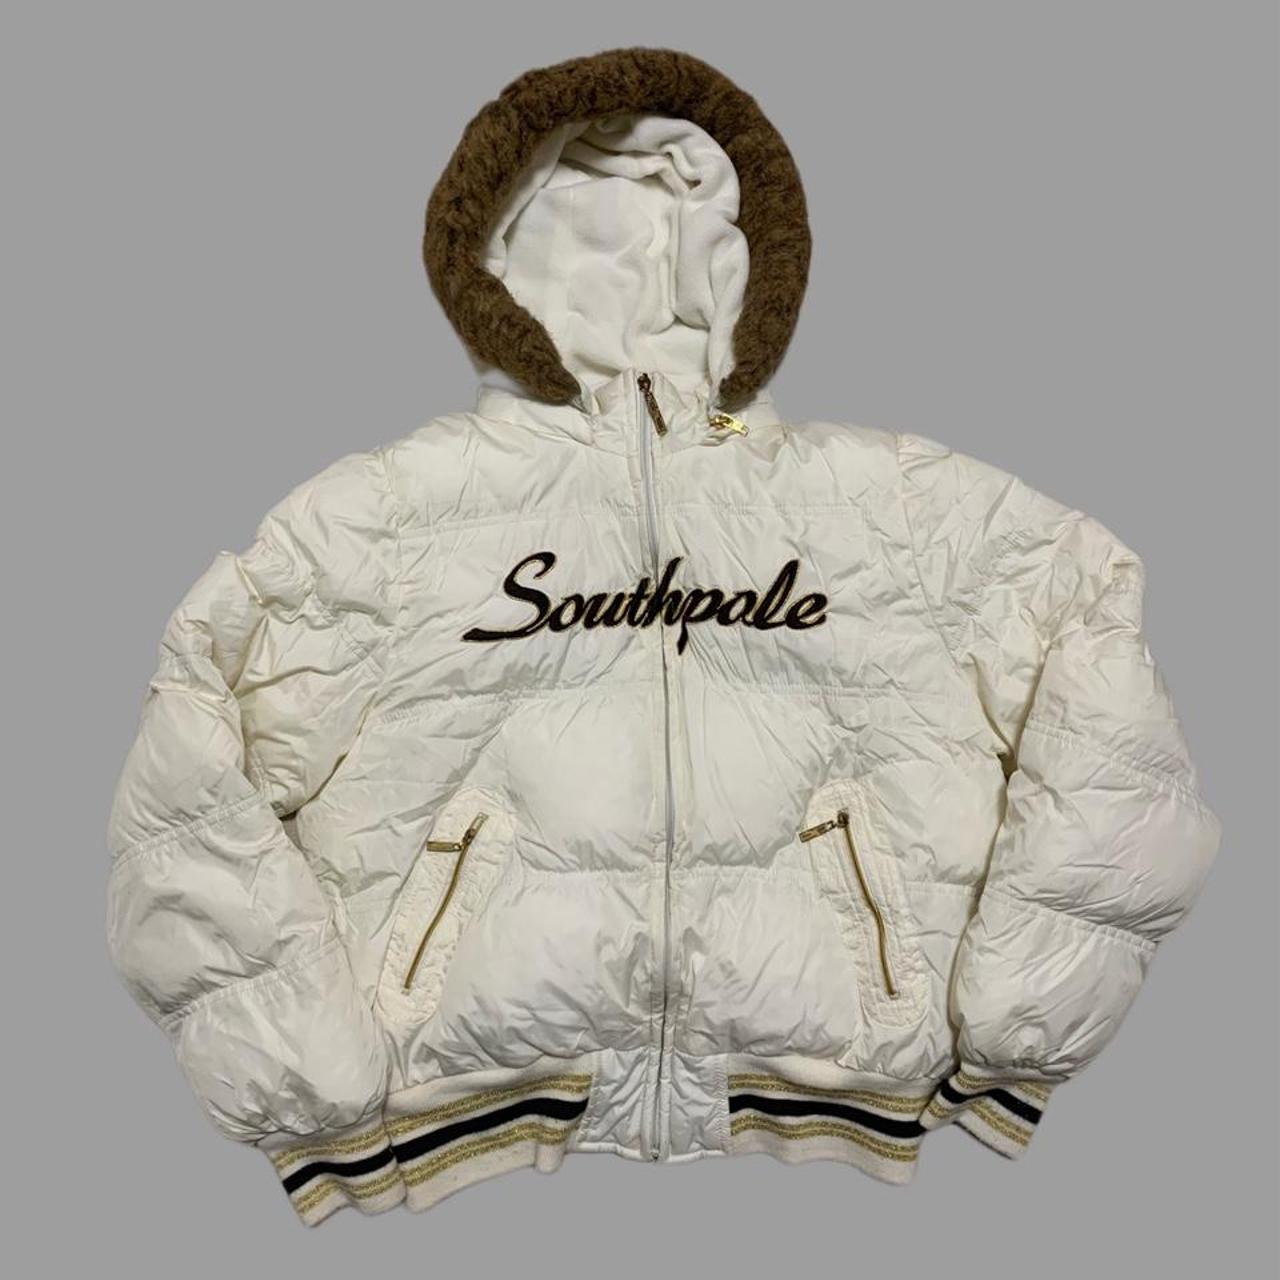 Vintage Y2K 2000s Southpole puffer coat! ️ Such a... - Depop